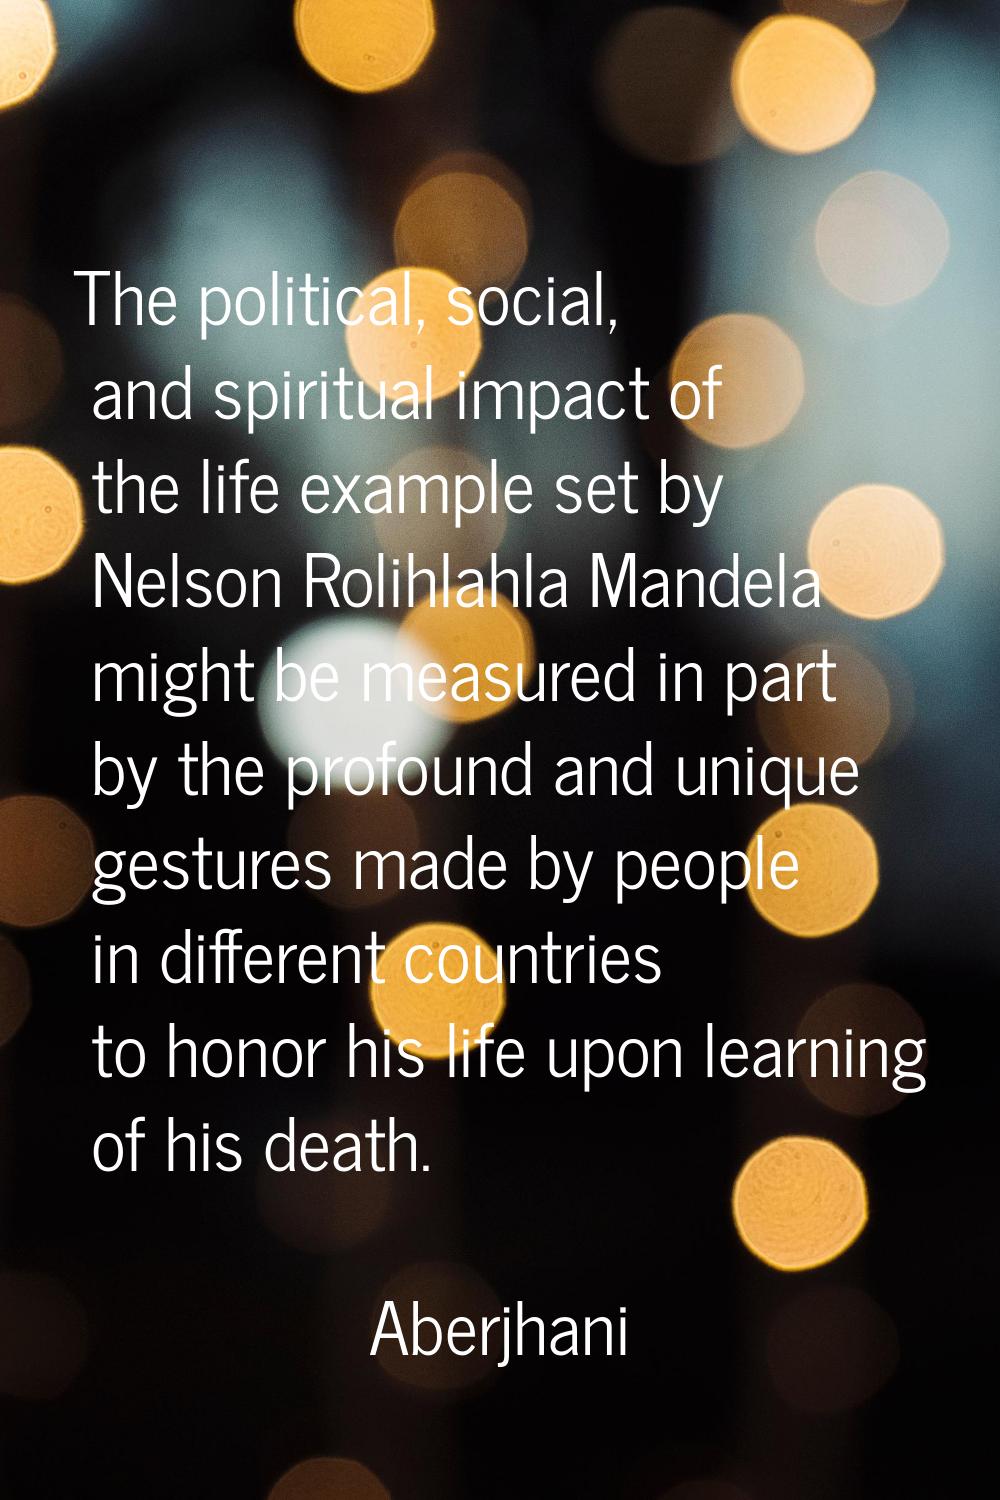 The political, social, and spiritual impact of the life example set by Nelson Rolihlahla Mandela mi